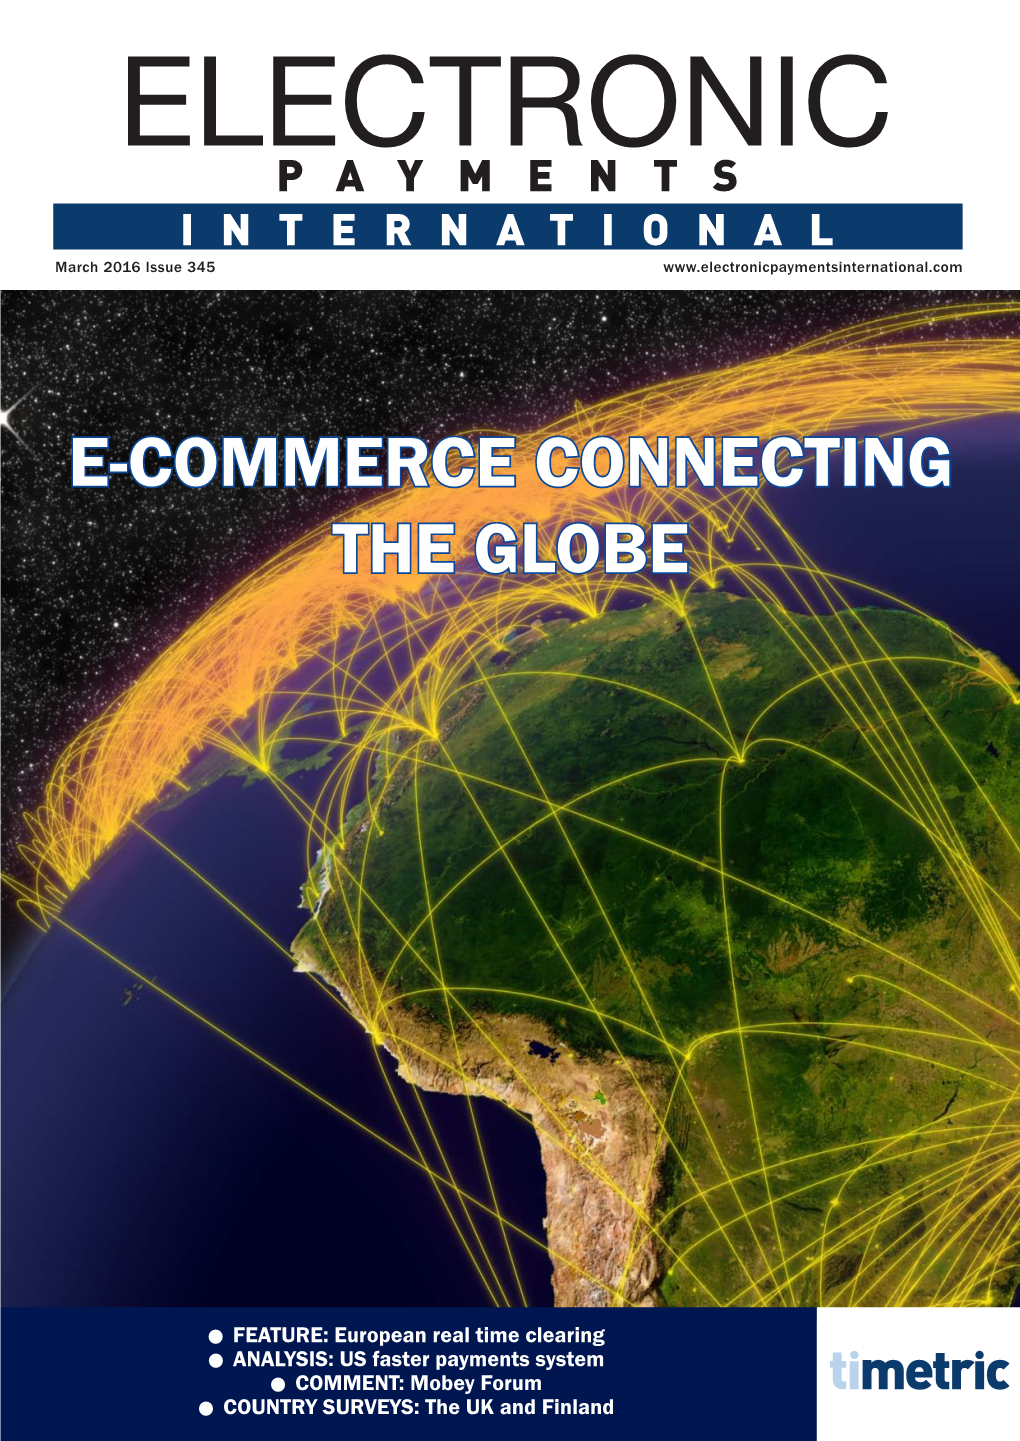 E-Commerce Connecting the Globe